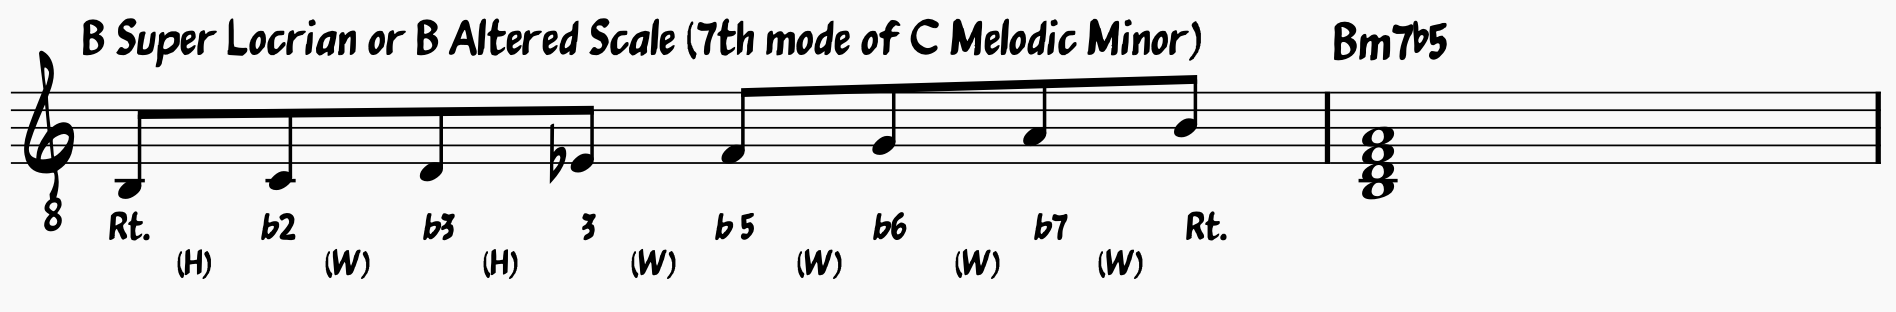 B Super Locrian or B Altered Scale; Seventh Mode of the C Melodic Minor Scale